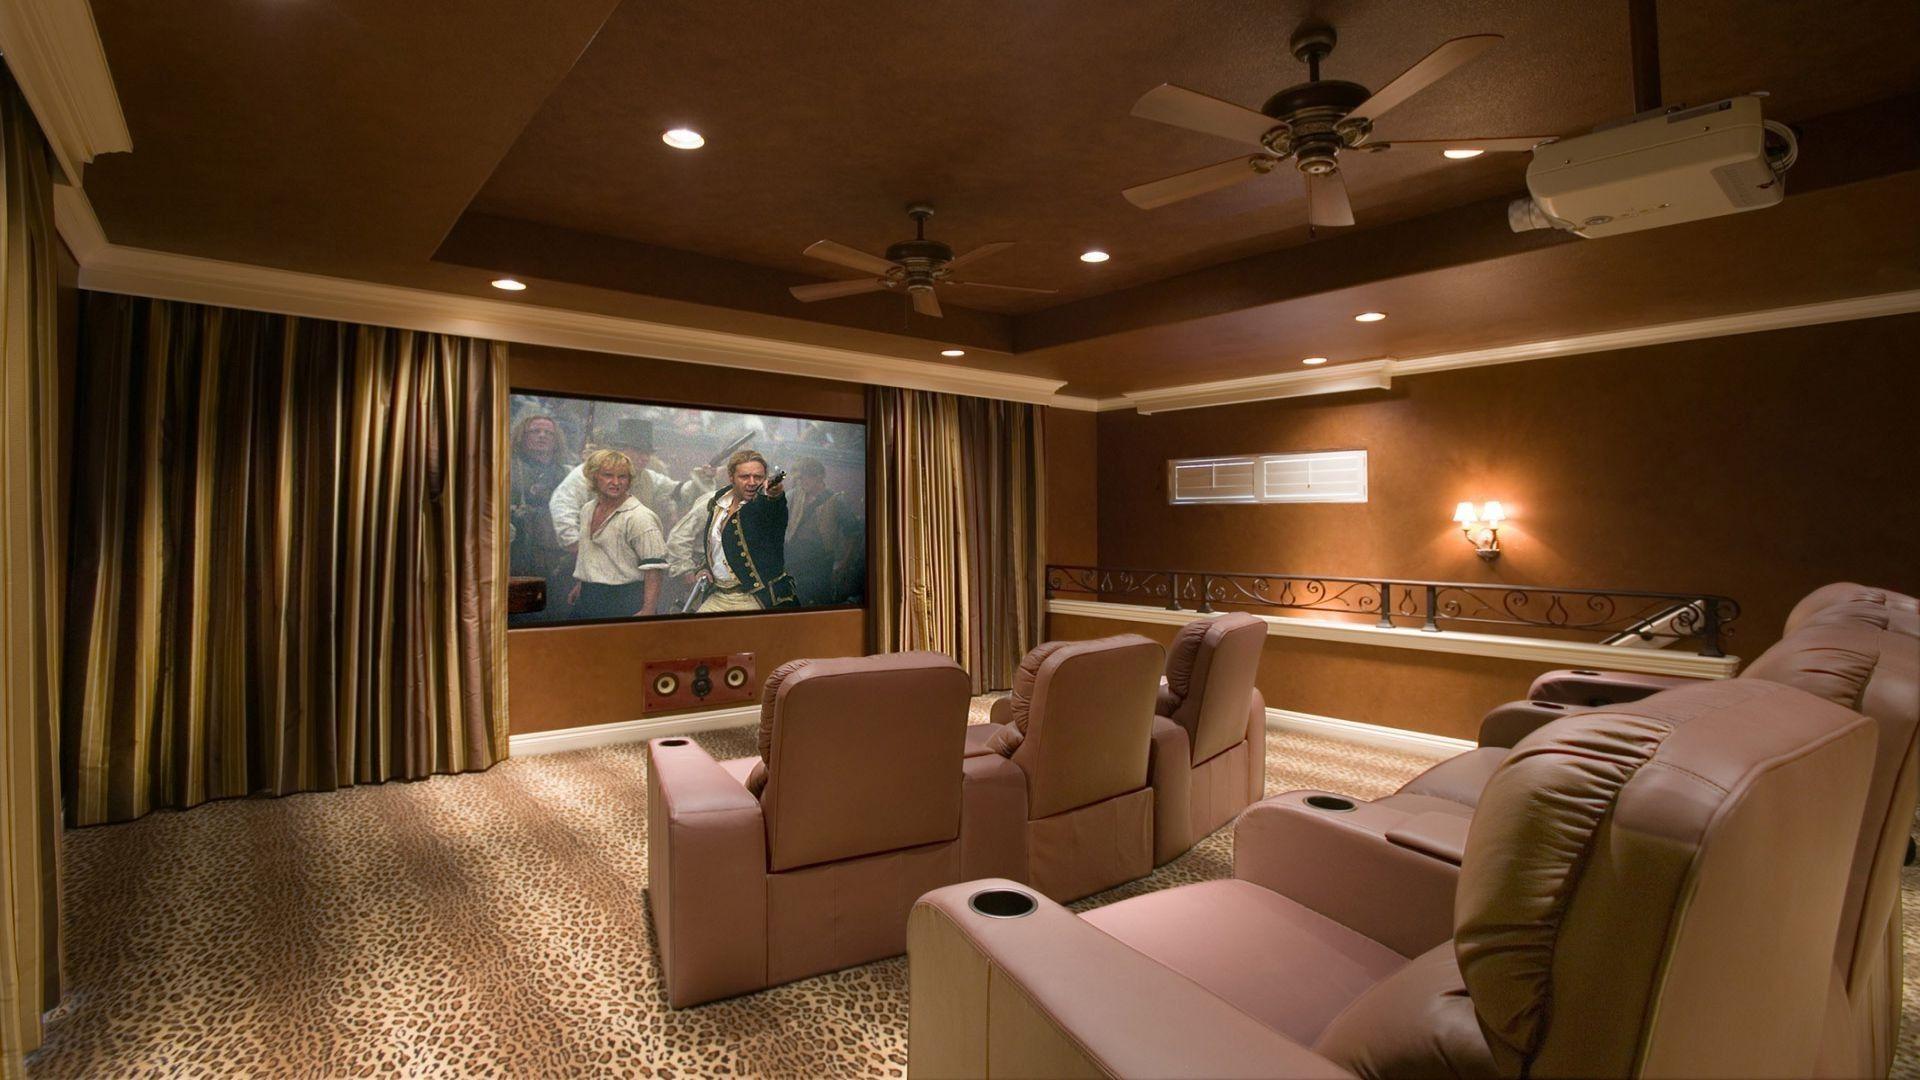 Home Theatre Wallpapers